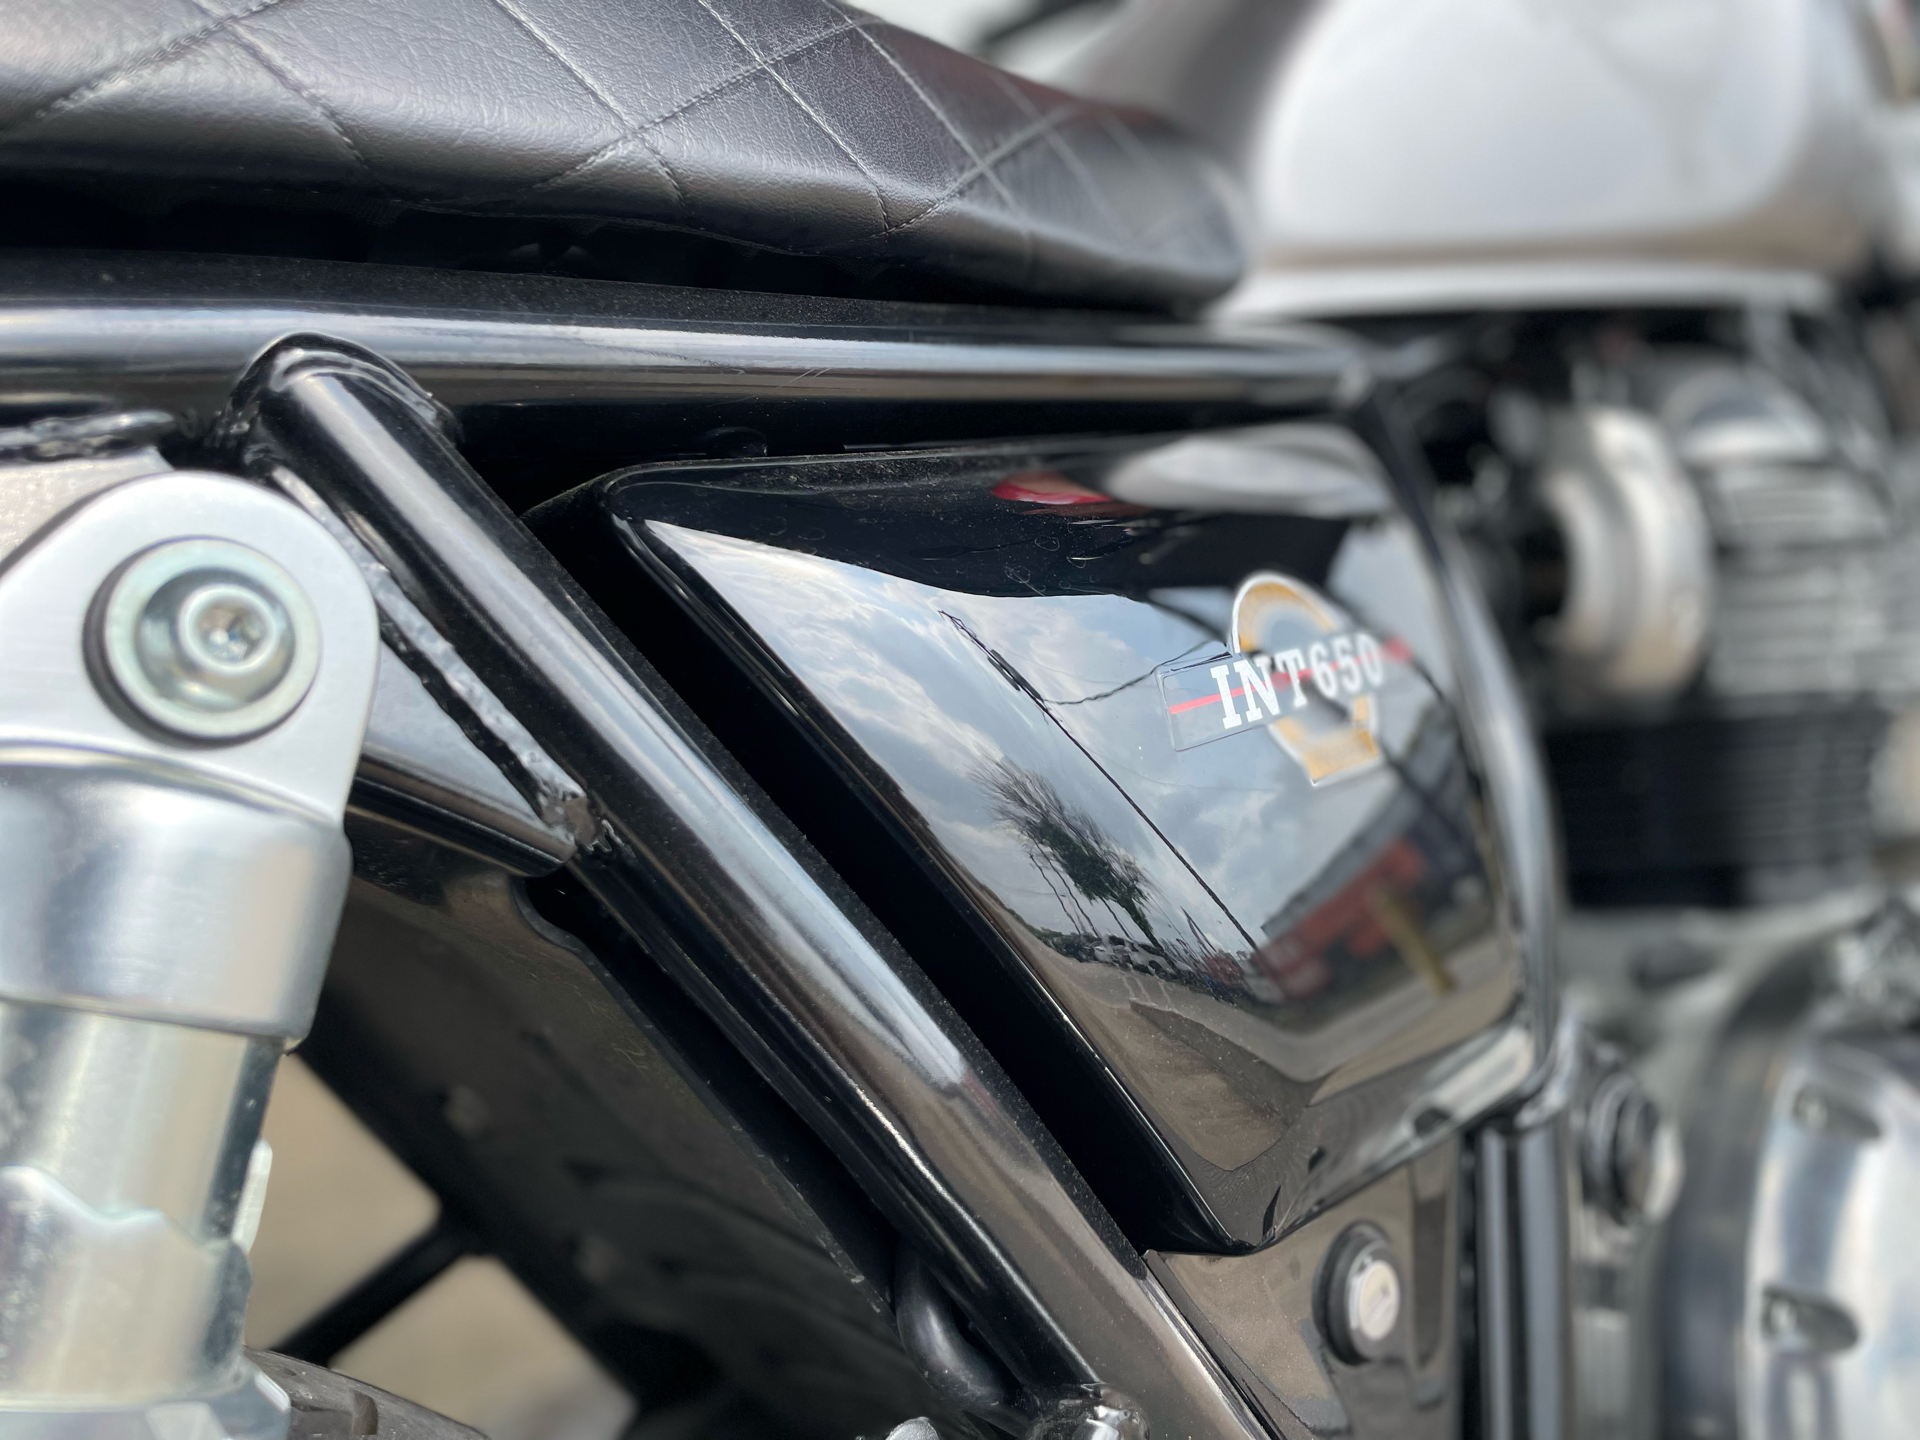 2019 Royal Enfield INT650 in Austin, Texas - Photo 5